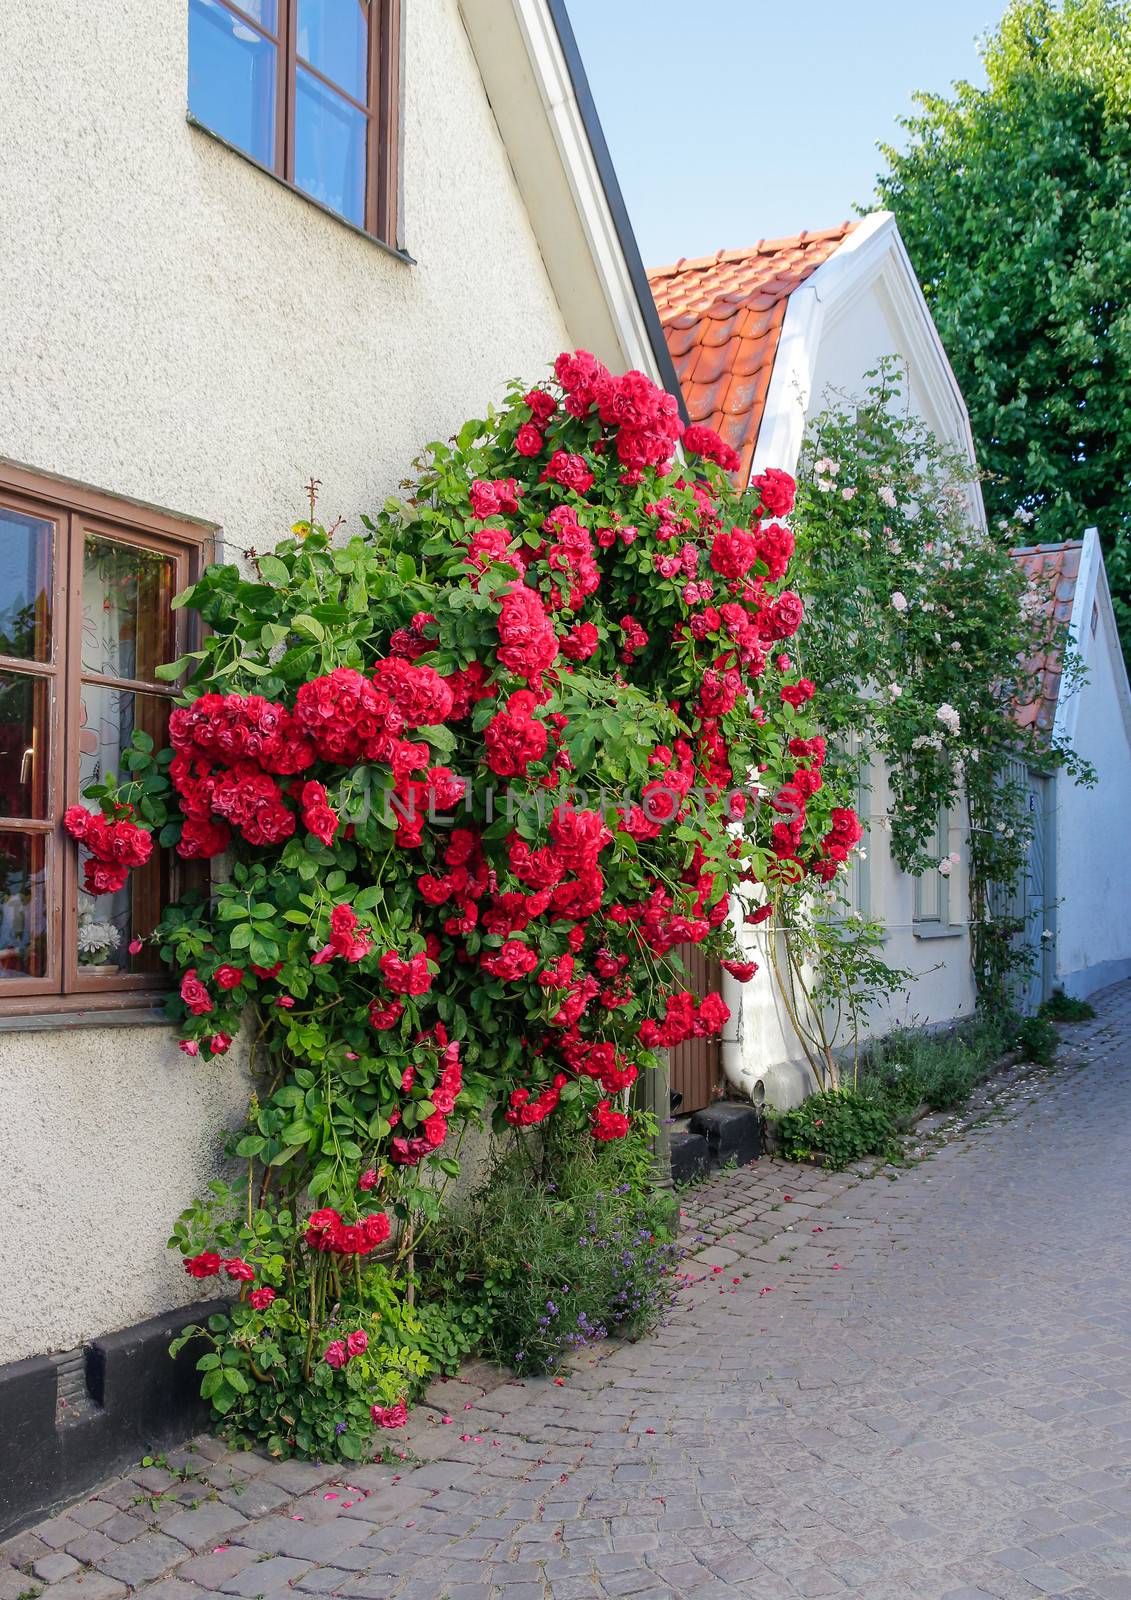 Swedish town Visby, famous for its roses. Gotland, Sweden.